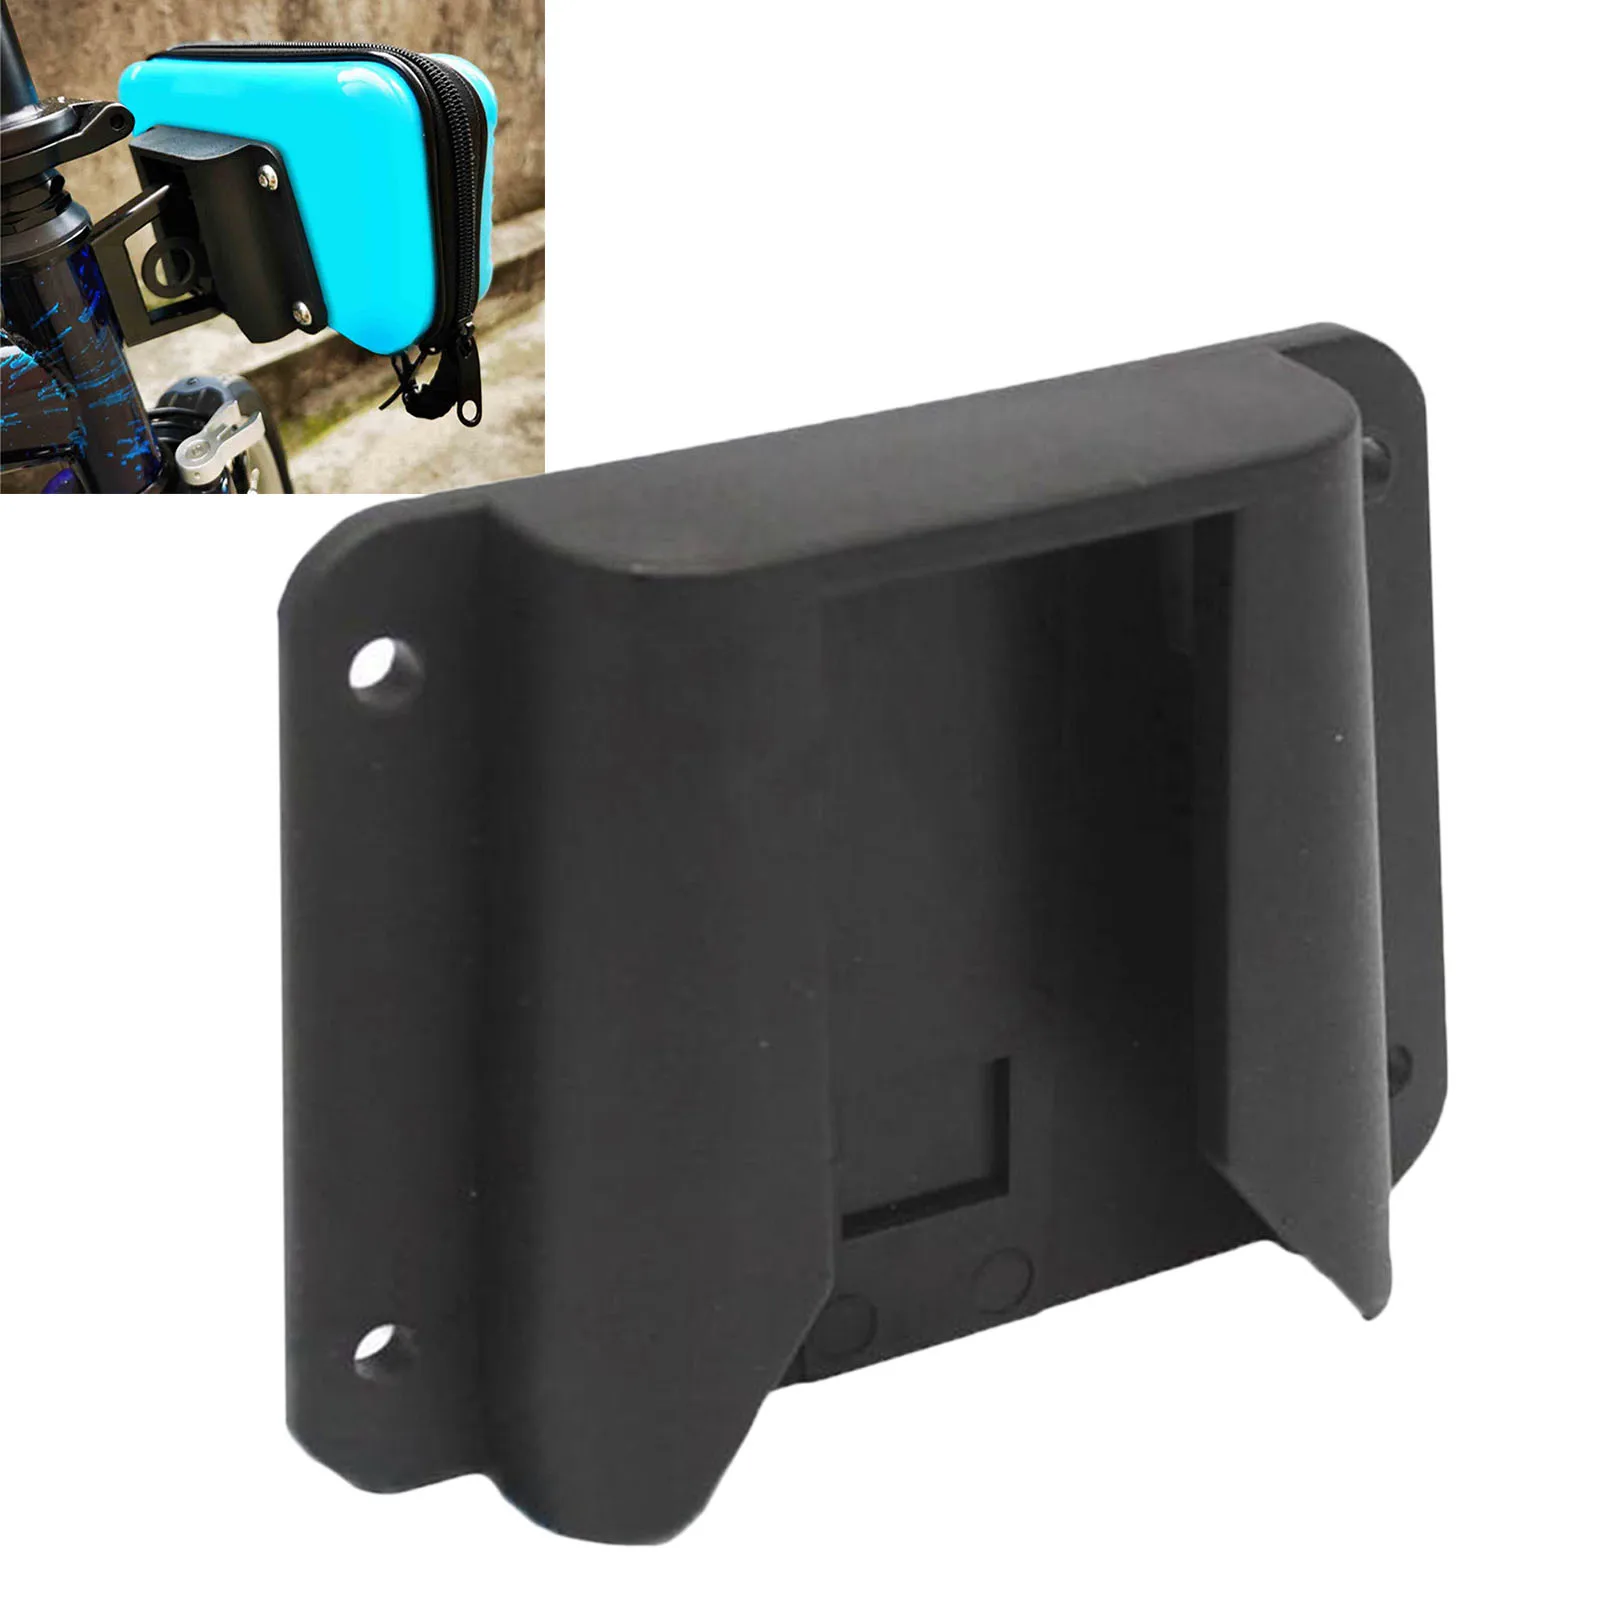 Carrier Block Adapter For Brompton Folding Bike Bicycle Bag Cargo Rack Front Carrier Block Bike Part Accessory